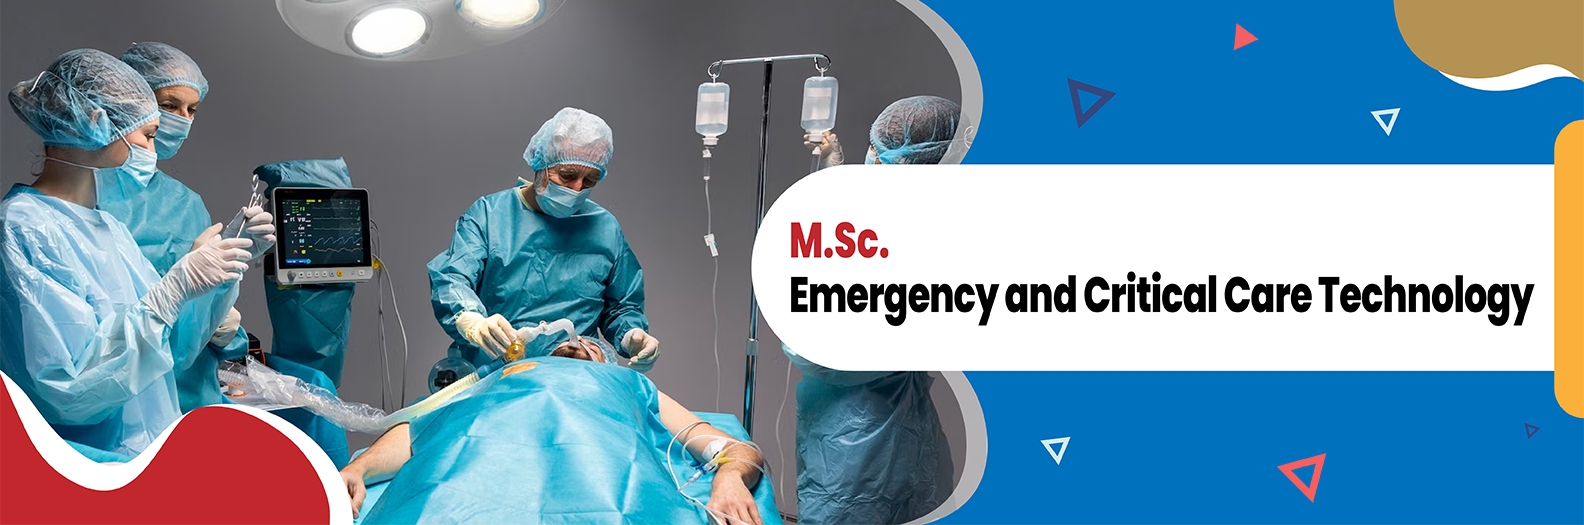 M.Sc. Emergency and Critical Care Technology